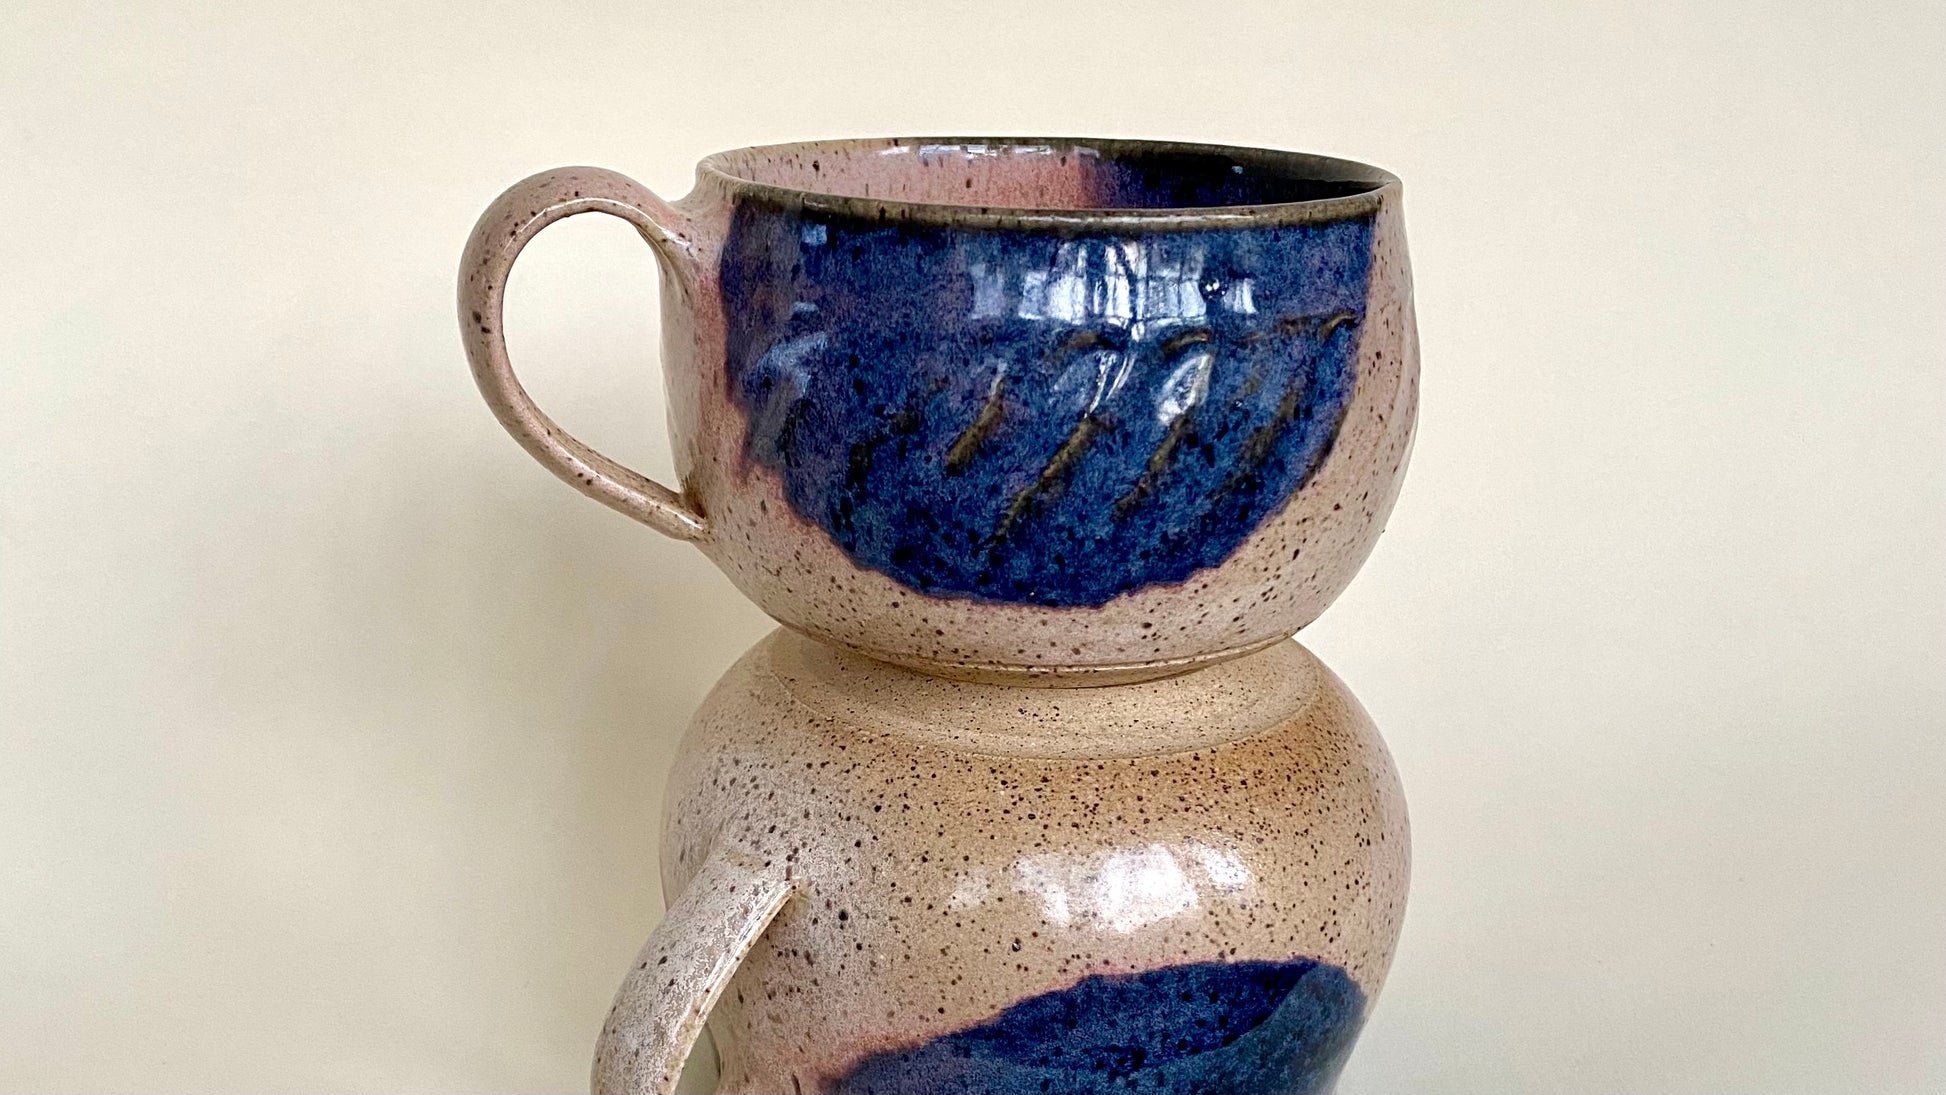 A generously sized soup mug with a wide, low profile, but plenty of depth.  The mouth comes in slightly to counteract sloshing or spilling.  A comfortable handle attaches to one side and features gentle contouring on the underside ensuring an easy grip.  Glaze options include a deep indigo atop a shell pink, or a rich blue-green verdigris atop a warm sandy golden brown. 